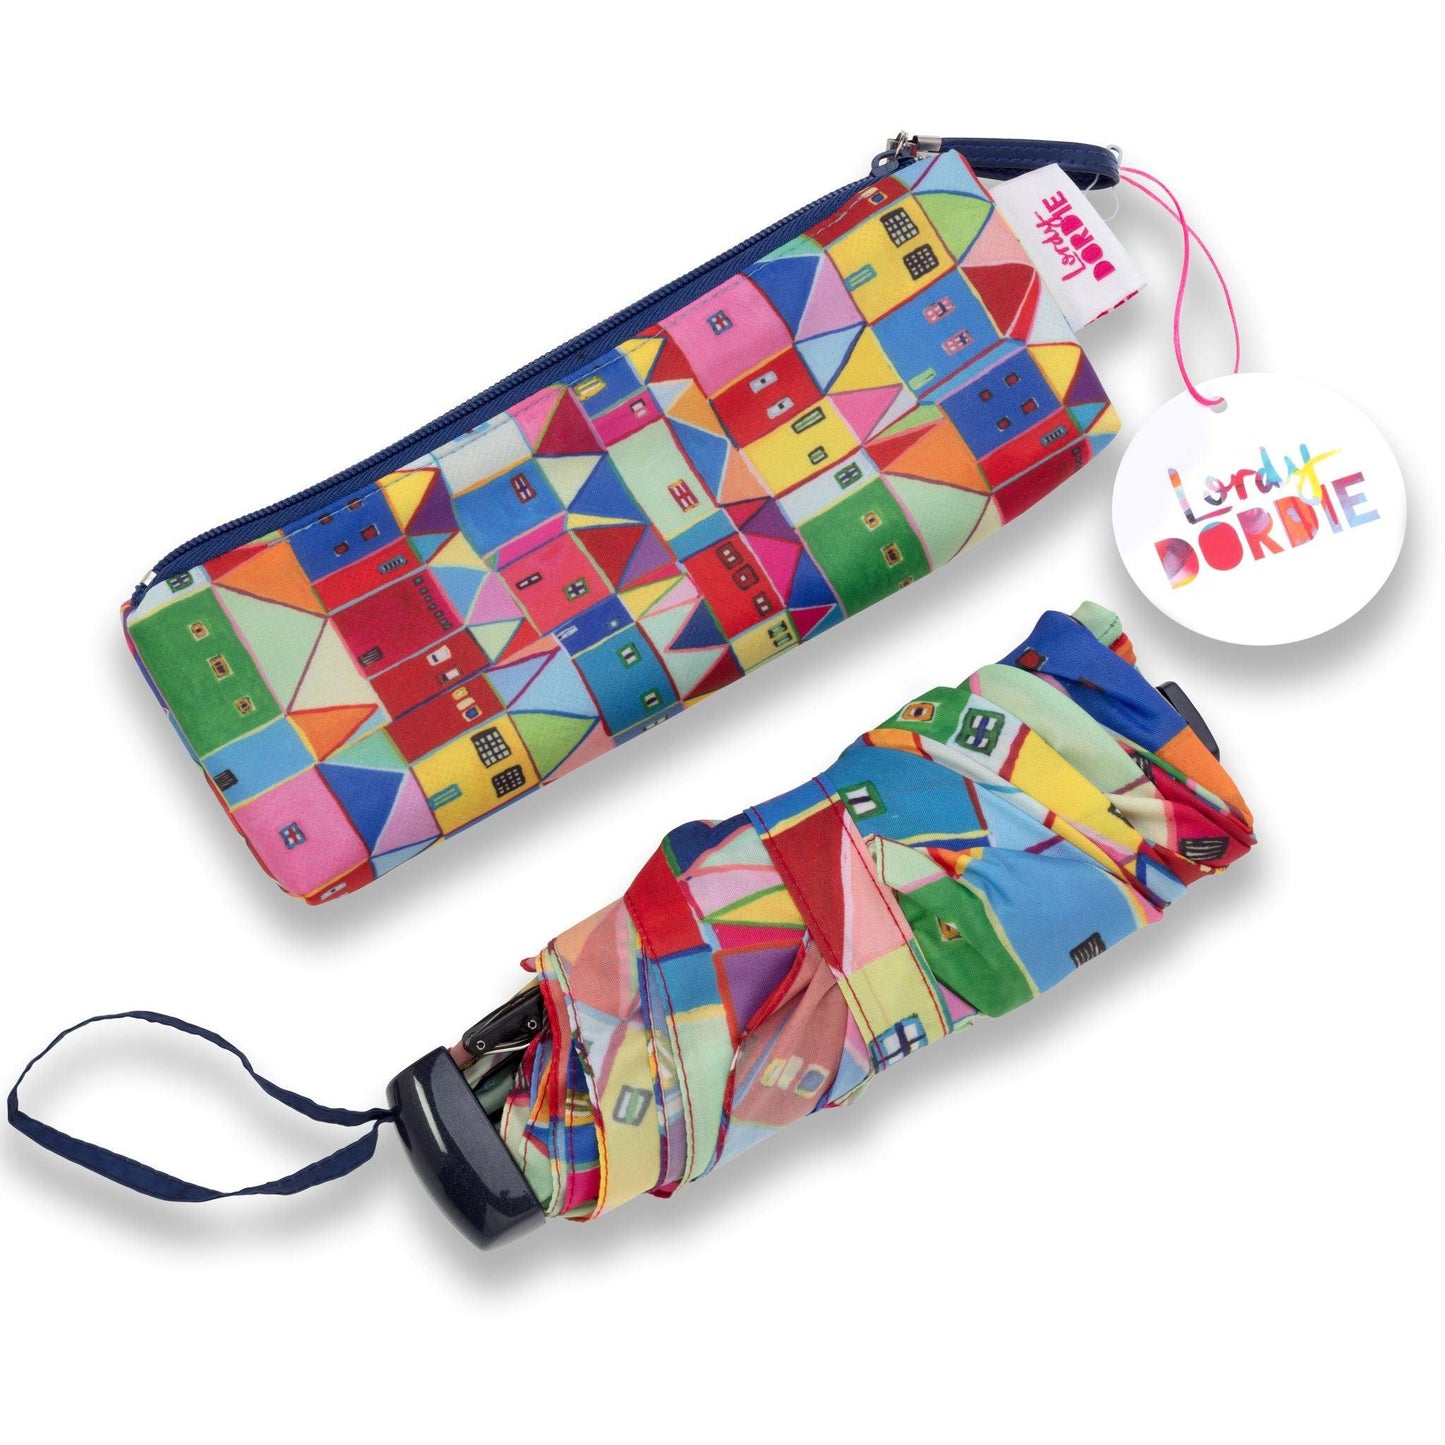 Load image into Gallery viewer, Little Village - Compact Art Umbrella - Lordy Dordie Art
